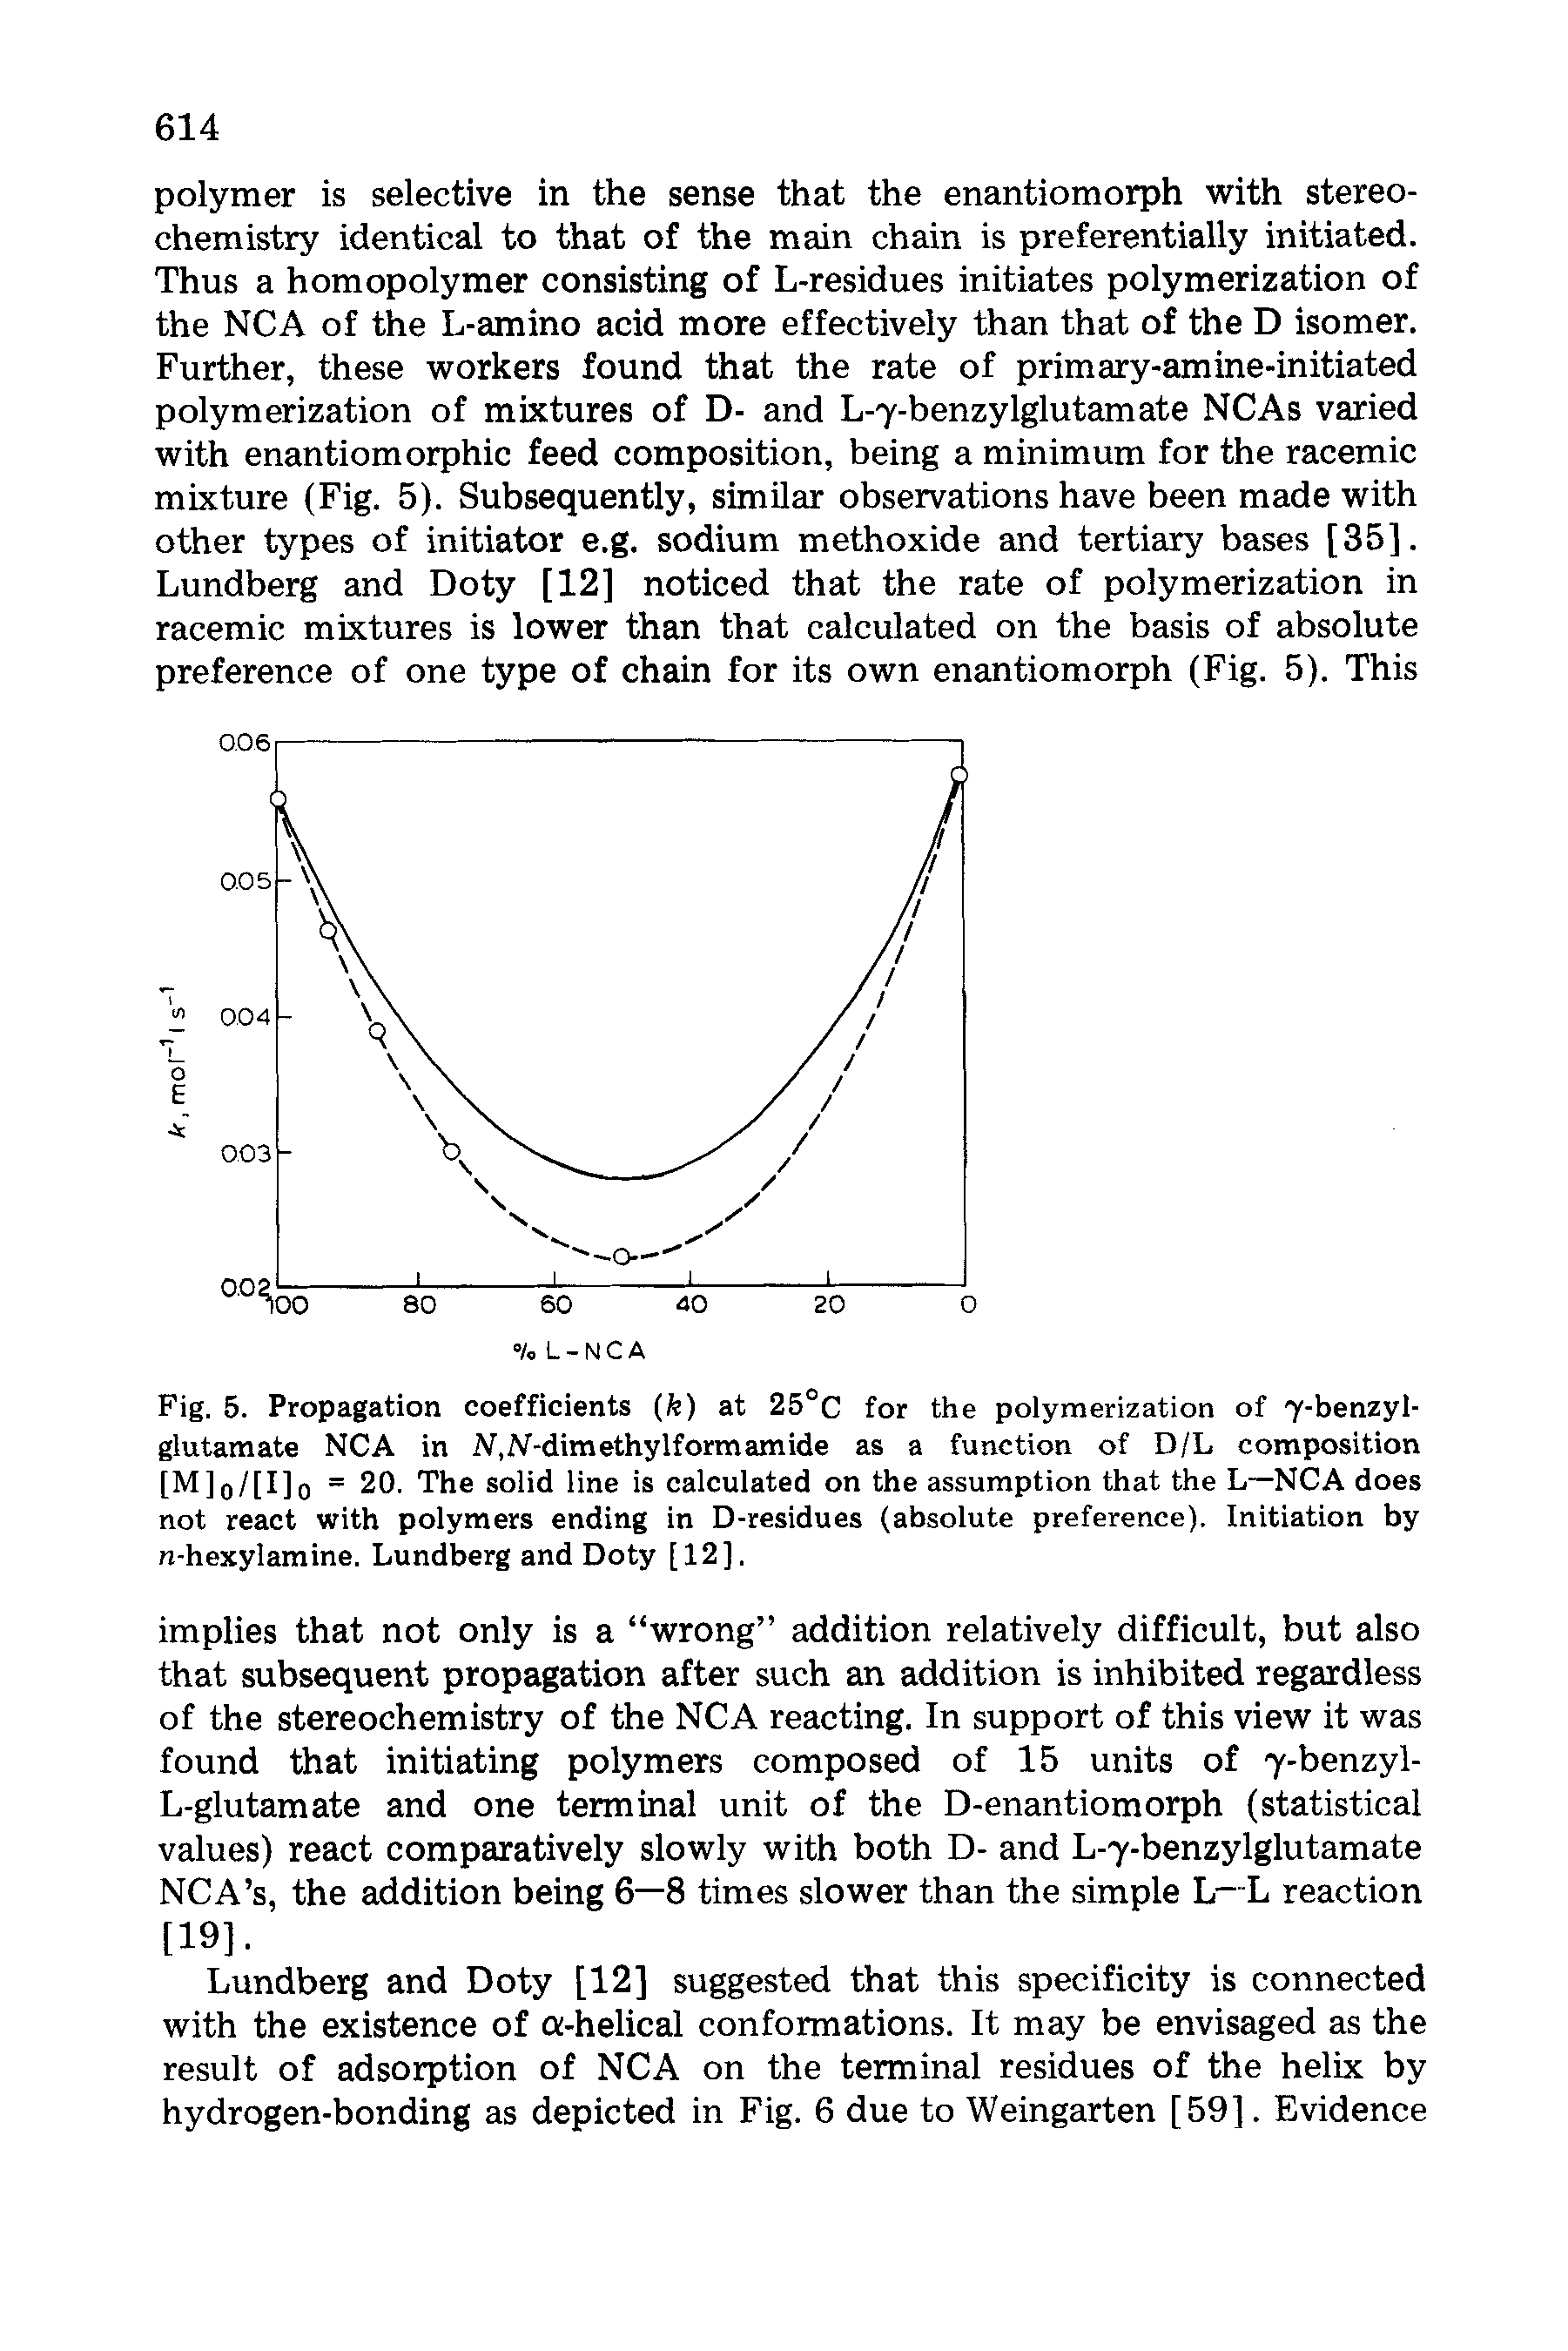 Fig. 5. Propagation coefficients (fe) at 25°C for the polymerization of 7-benzyl-glutamate NCA in NiN-dimethylformamide as a function of D/L composition [M]o/[I]o = 20. The solid line is calculated on the assumption that the L—NCA does not react with polymers ending in D-residues (absolute preference). Initiation by n-hexylamine. Lundberg and Doty [12].